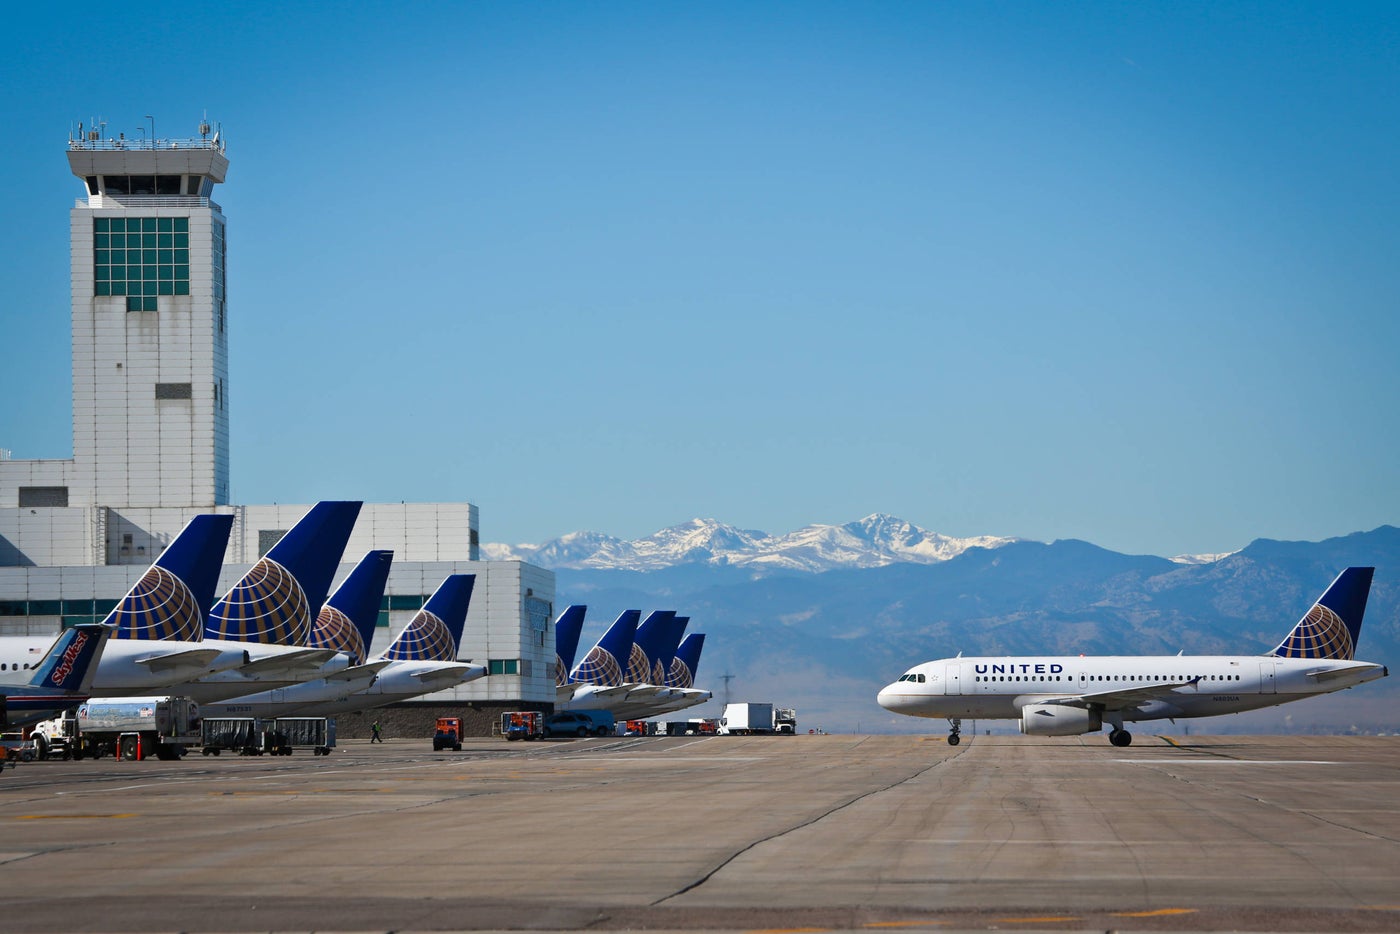 United Airlines plans more than 700 flights from Denver hub with new gates